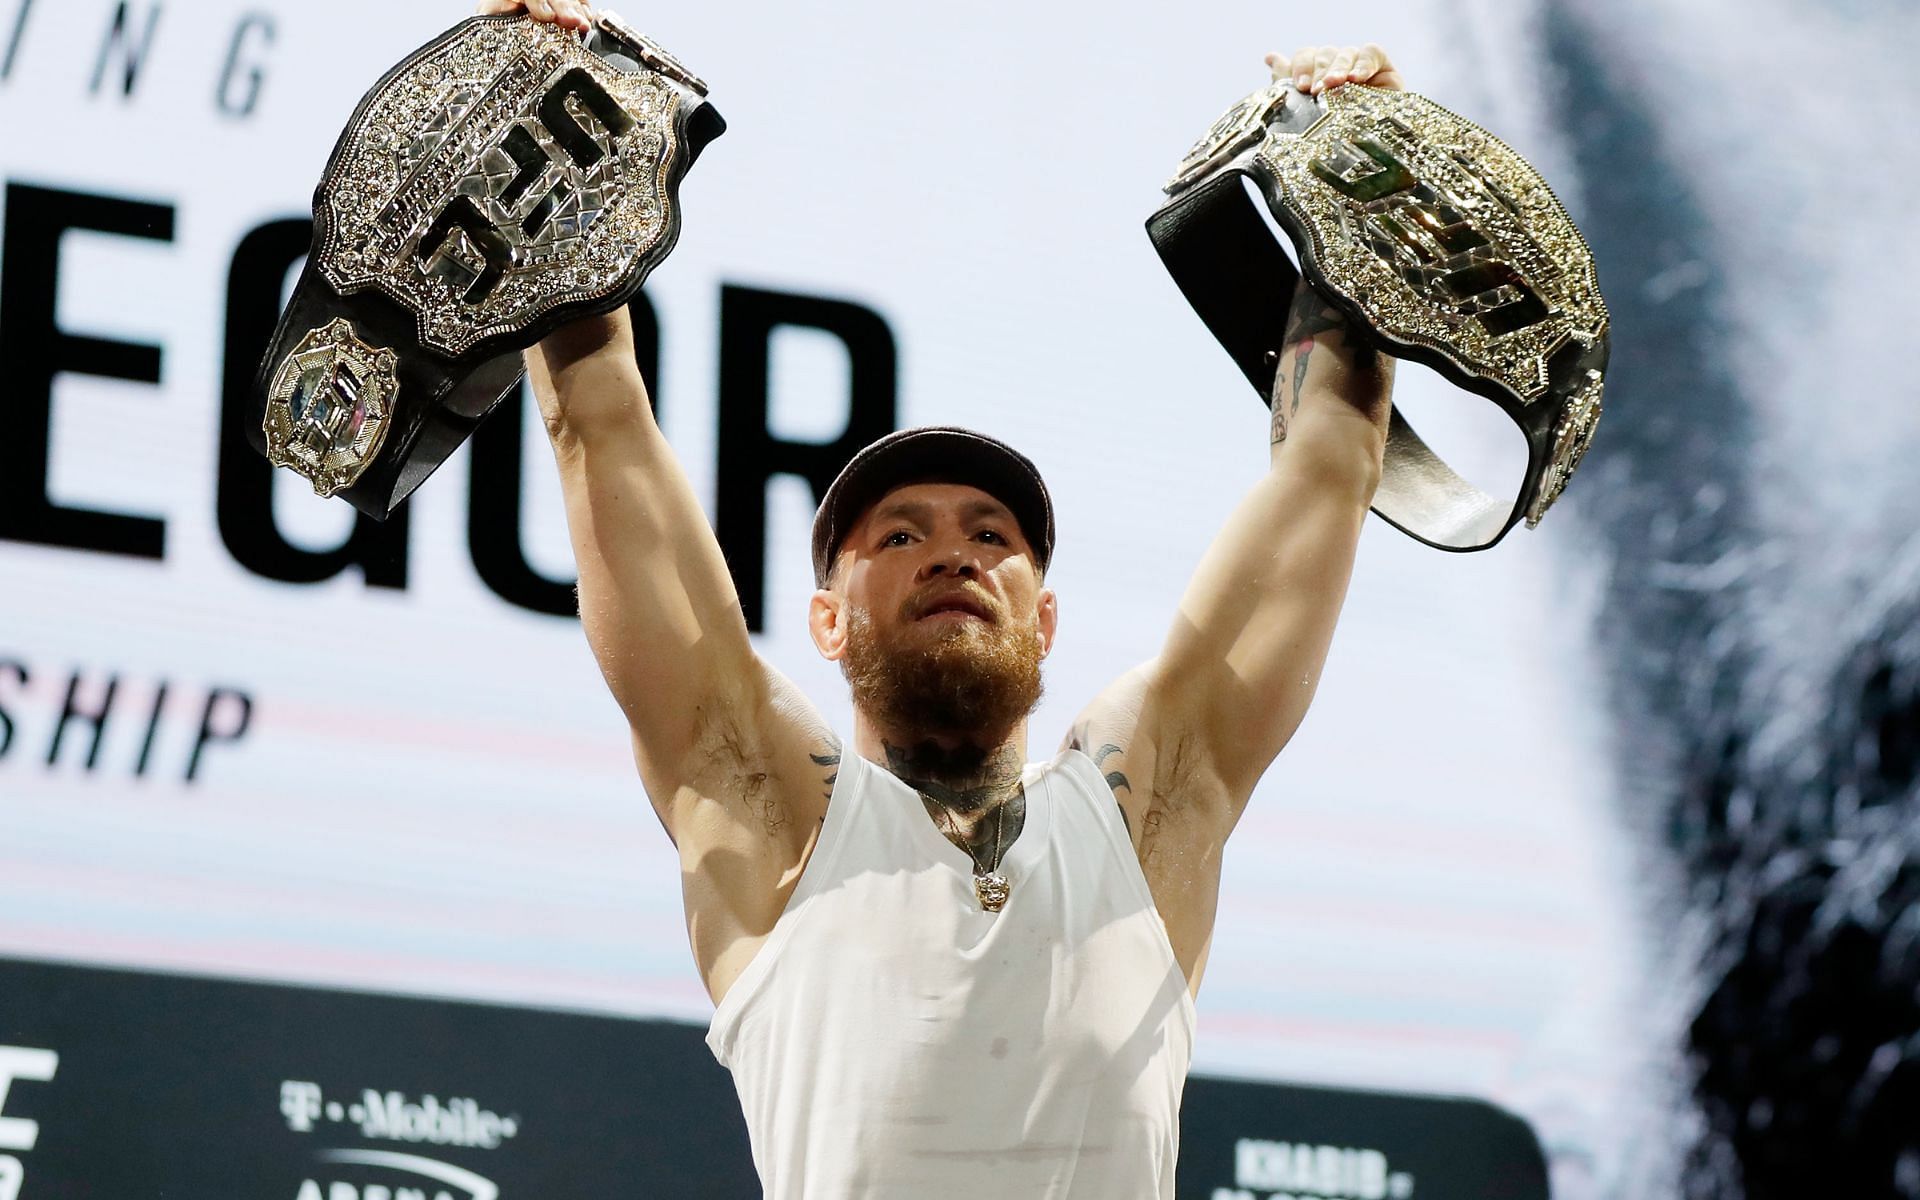 Conor McGregor poses for the cameras after a press conference for UFC 229